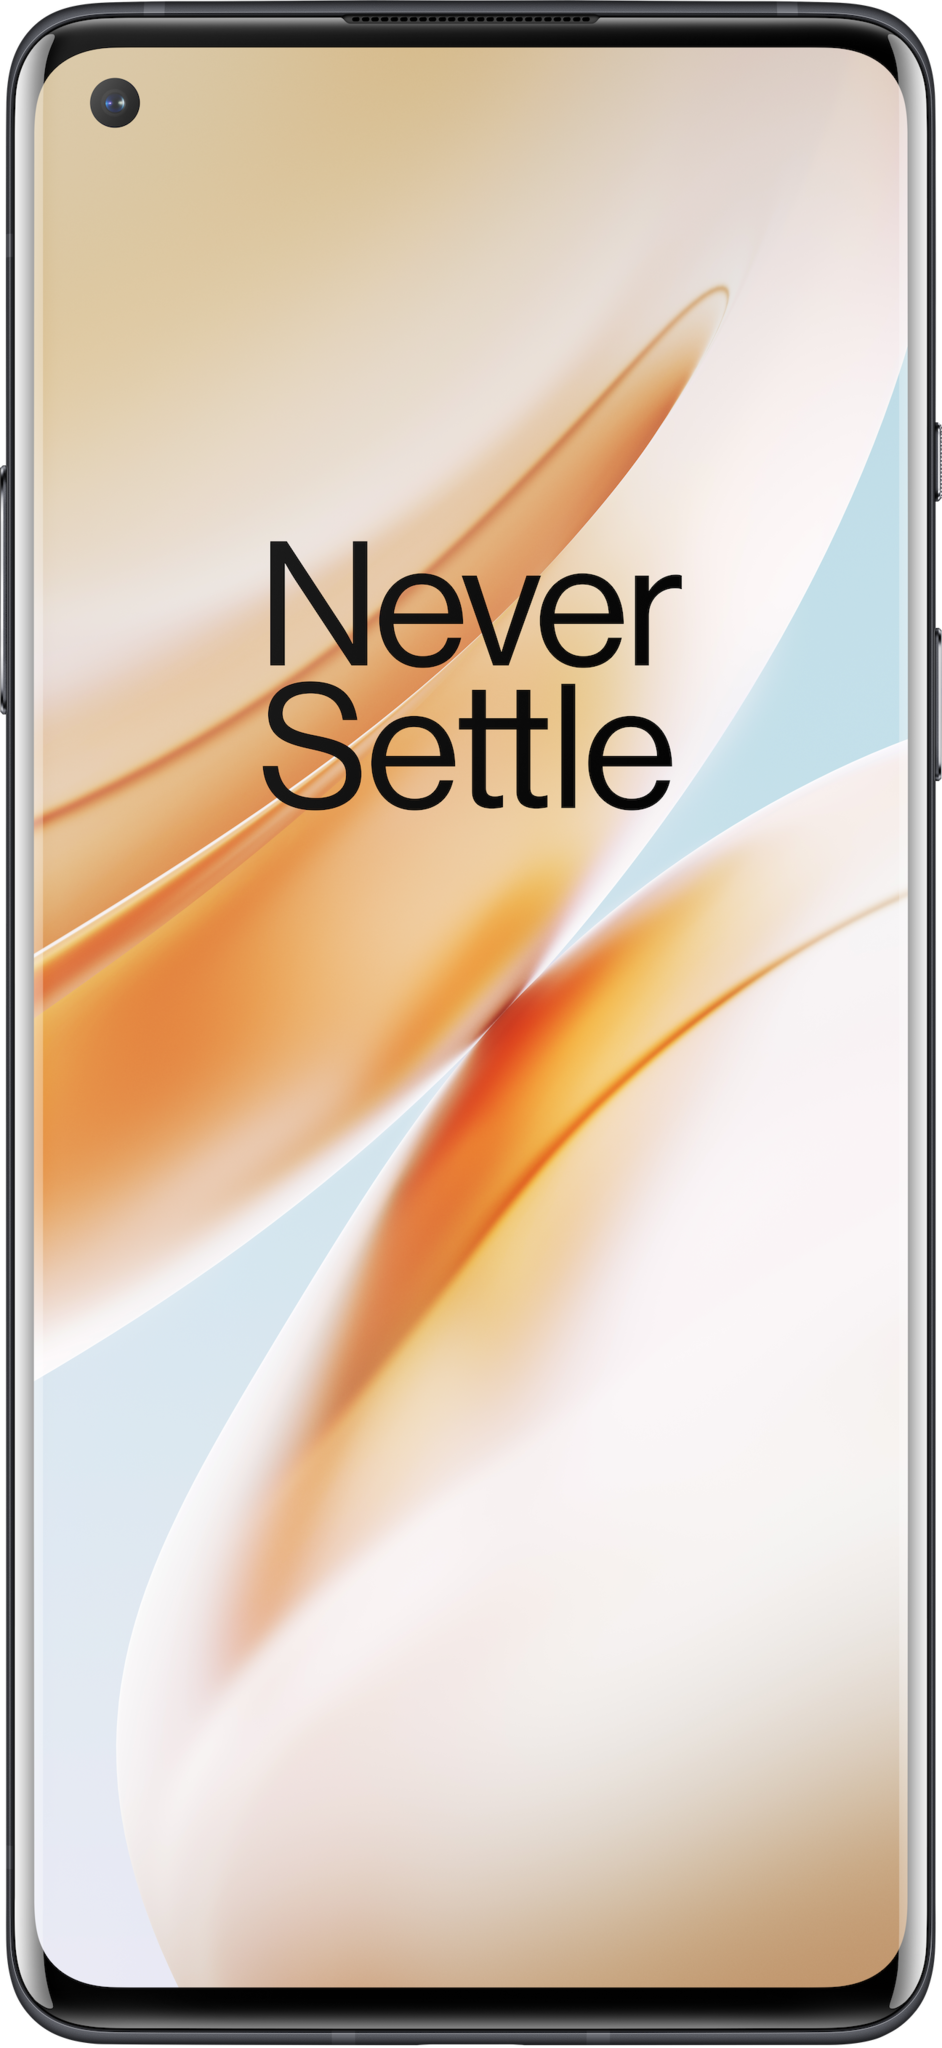 https://www.androidcentral.com/sites/androidcentral.com/files/styles/small/public/article_images/2020/04/oneplus-8-black-front-render.png?itok=7WWqfhE4